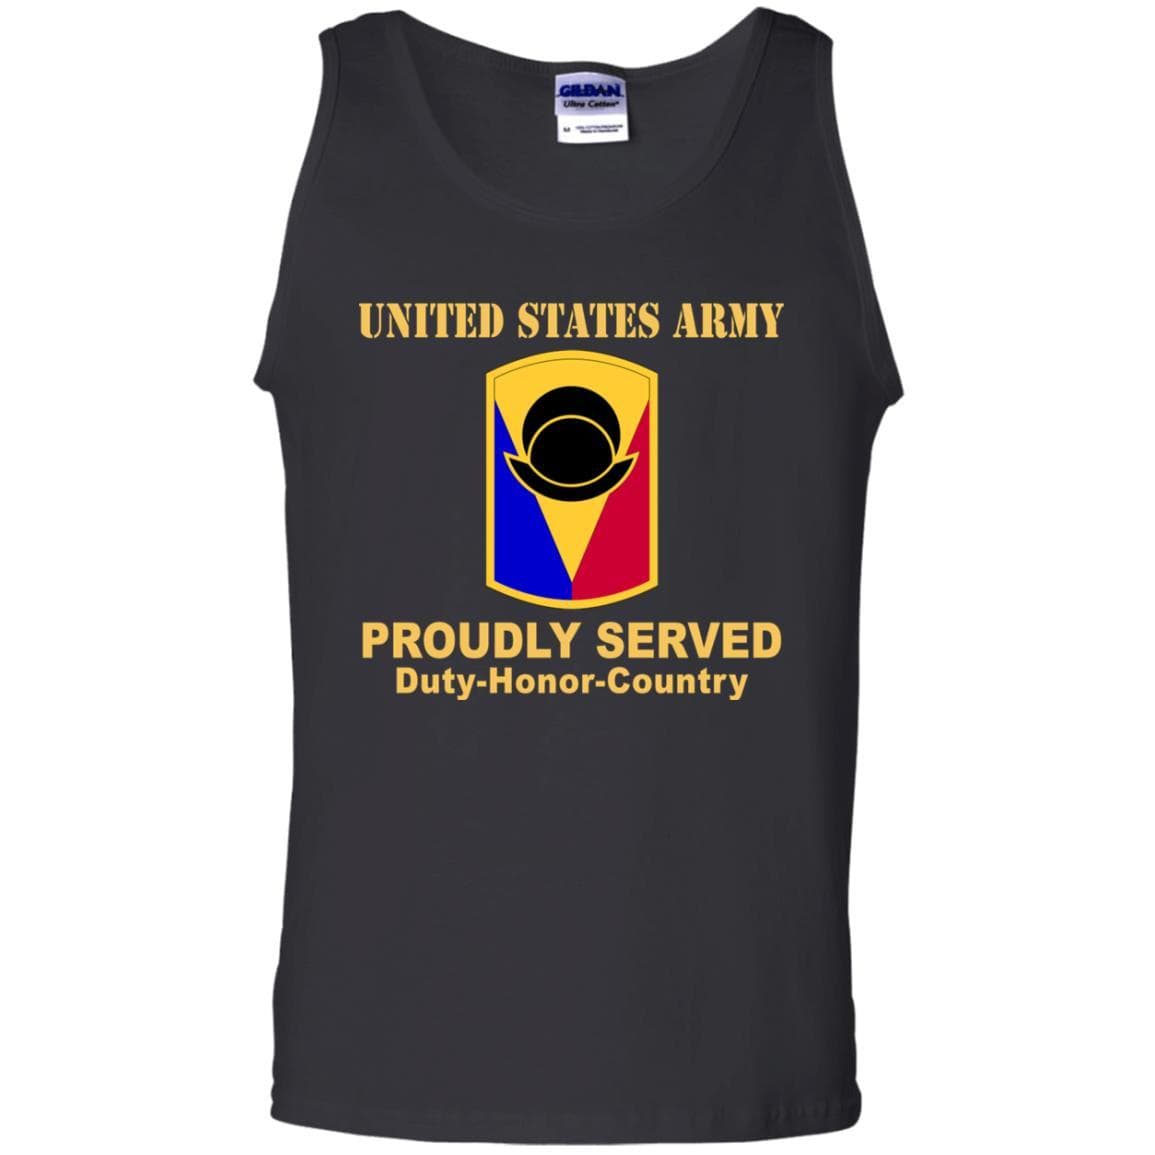 US ARMY 53RD INFANTRY BRIGADE COMBAT TEAM - Proudly Served T-Shirt On Front For Men-TShirt-Army-Veterans Nation